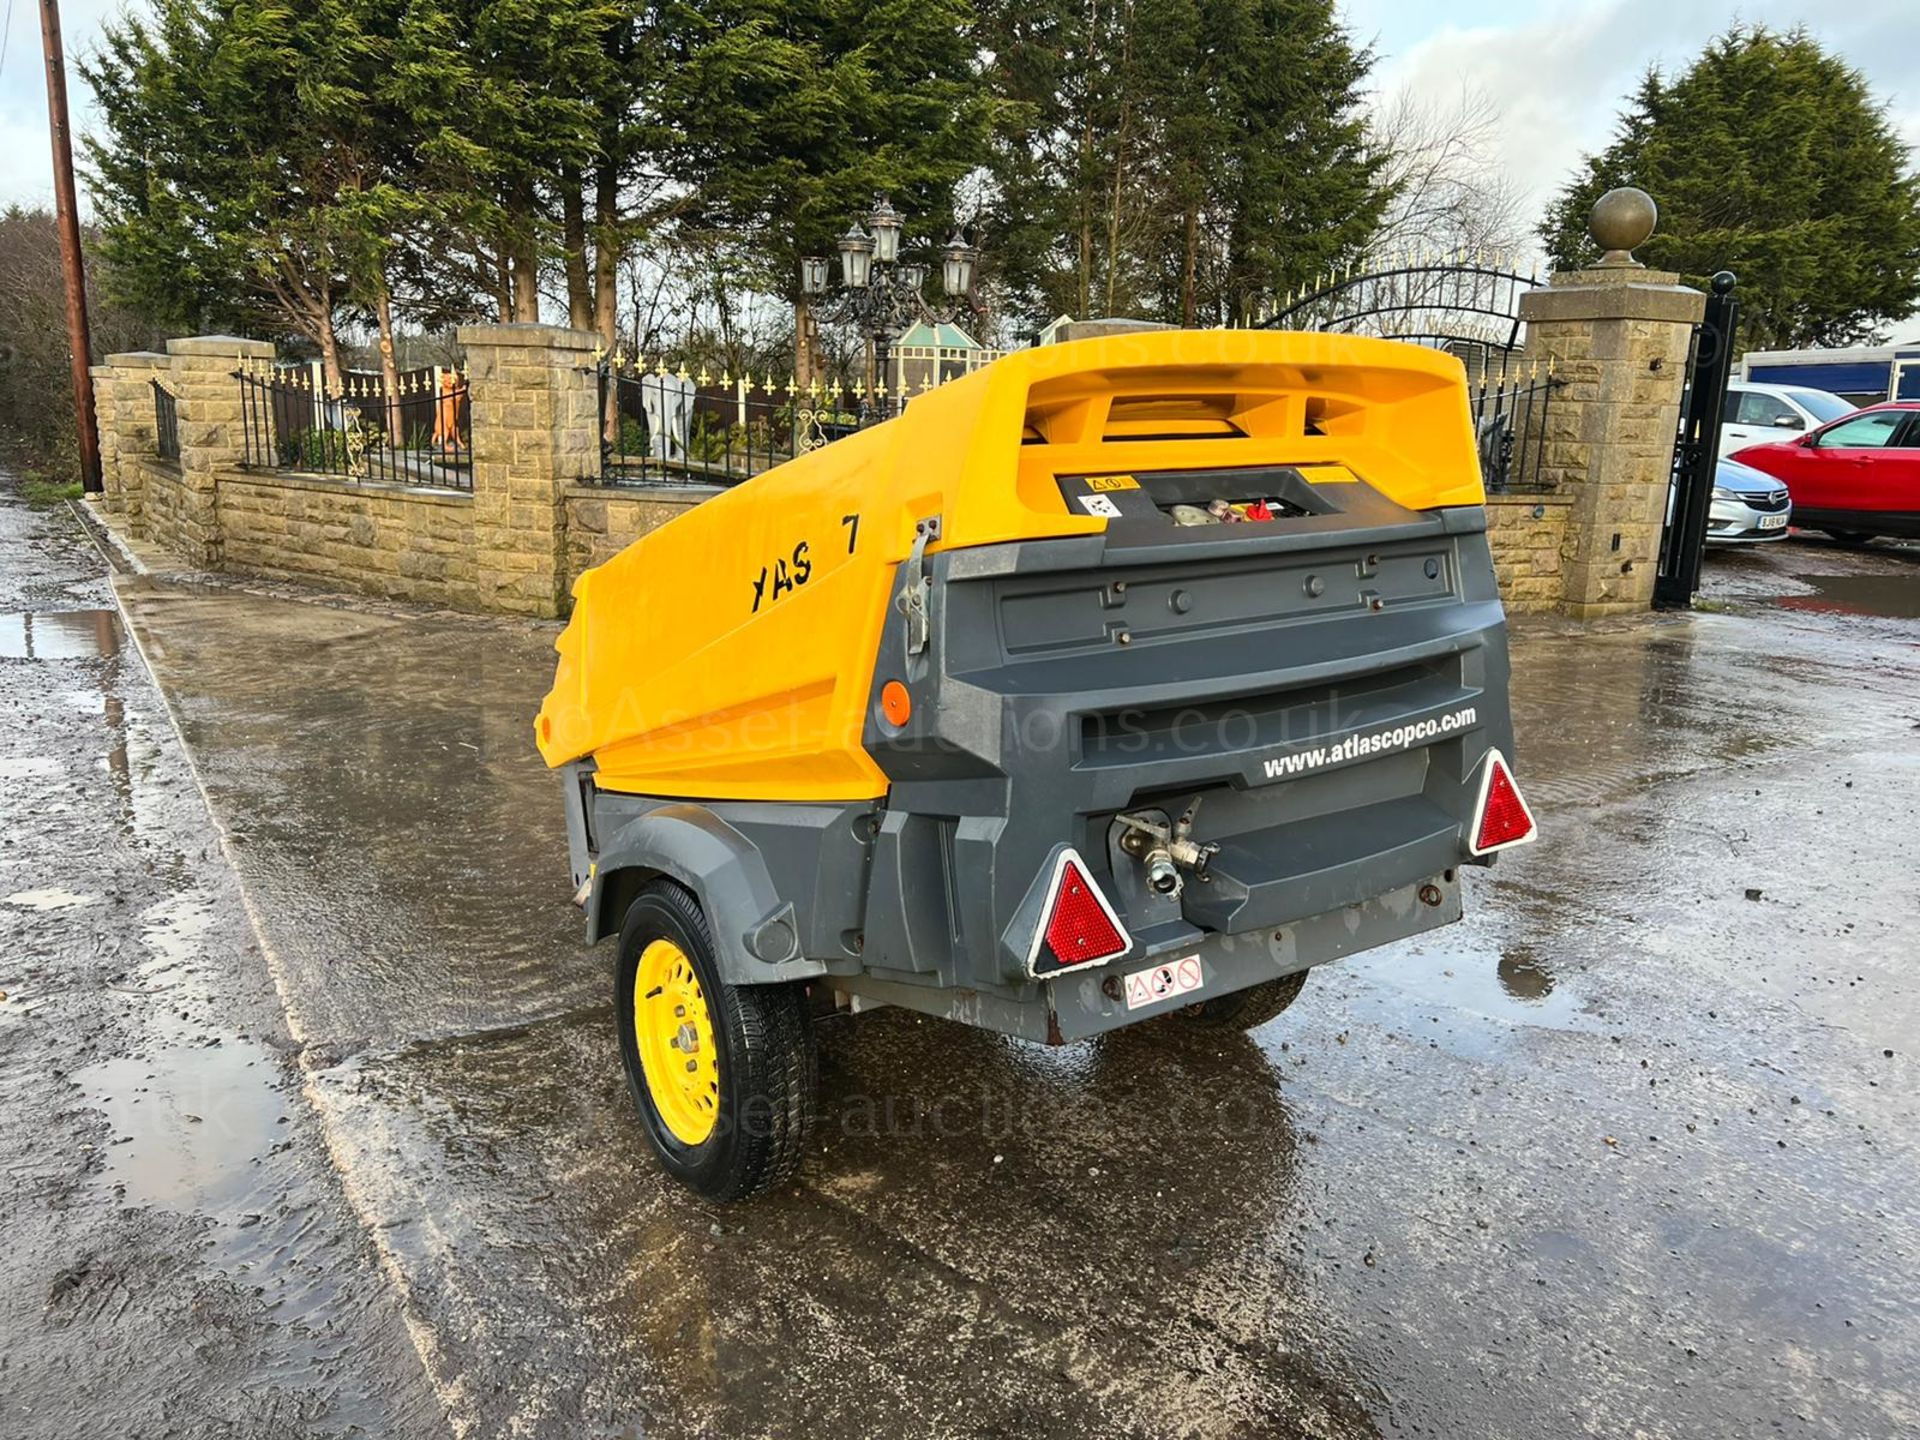 2008 ATLAS COPCO XAS77 DD PE SINGLE AXLE COMPRESSOR, RUNS AND MAKES AIR, SHOWING A LOW 730 HOURS - Image 5 of 15